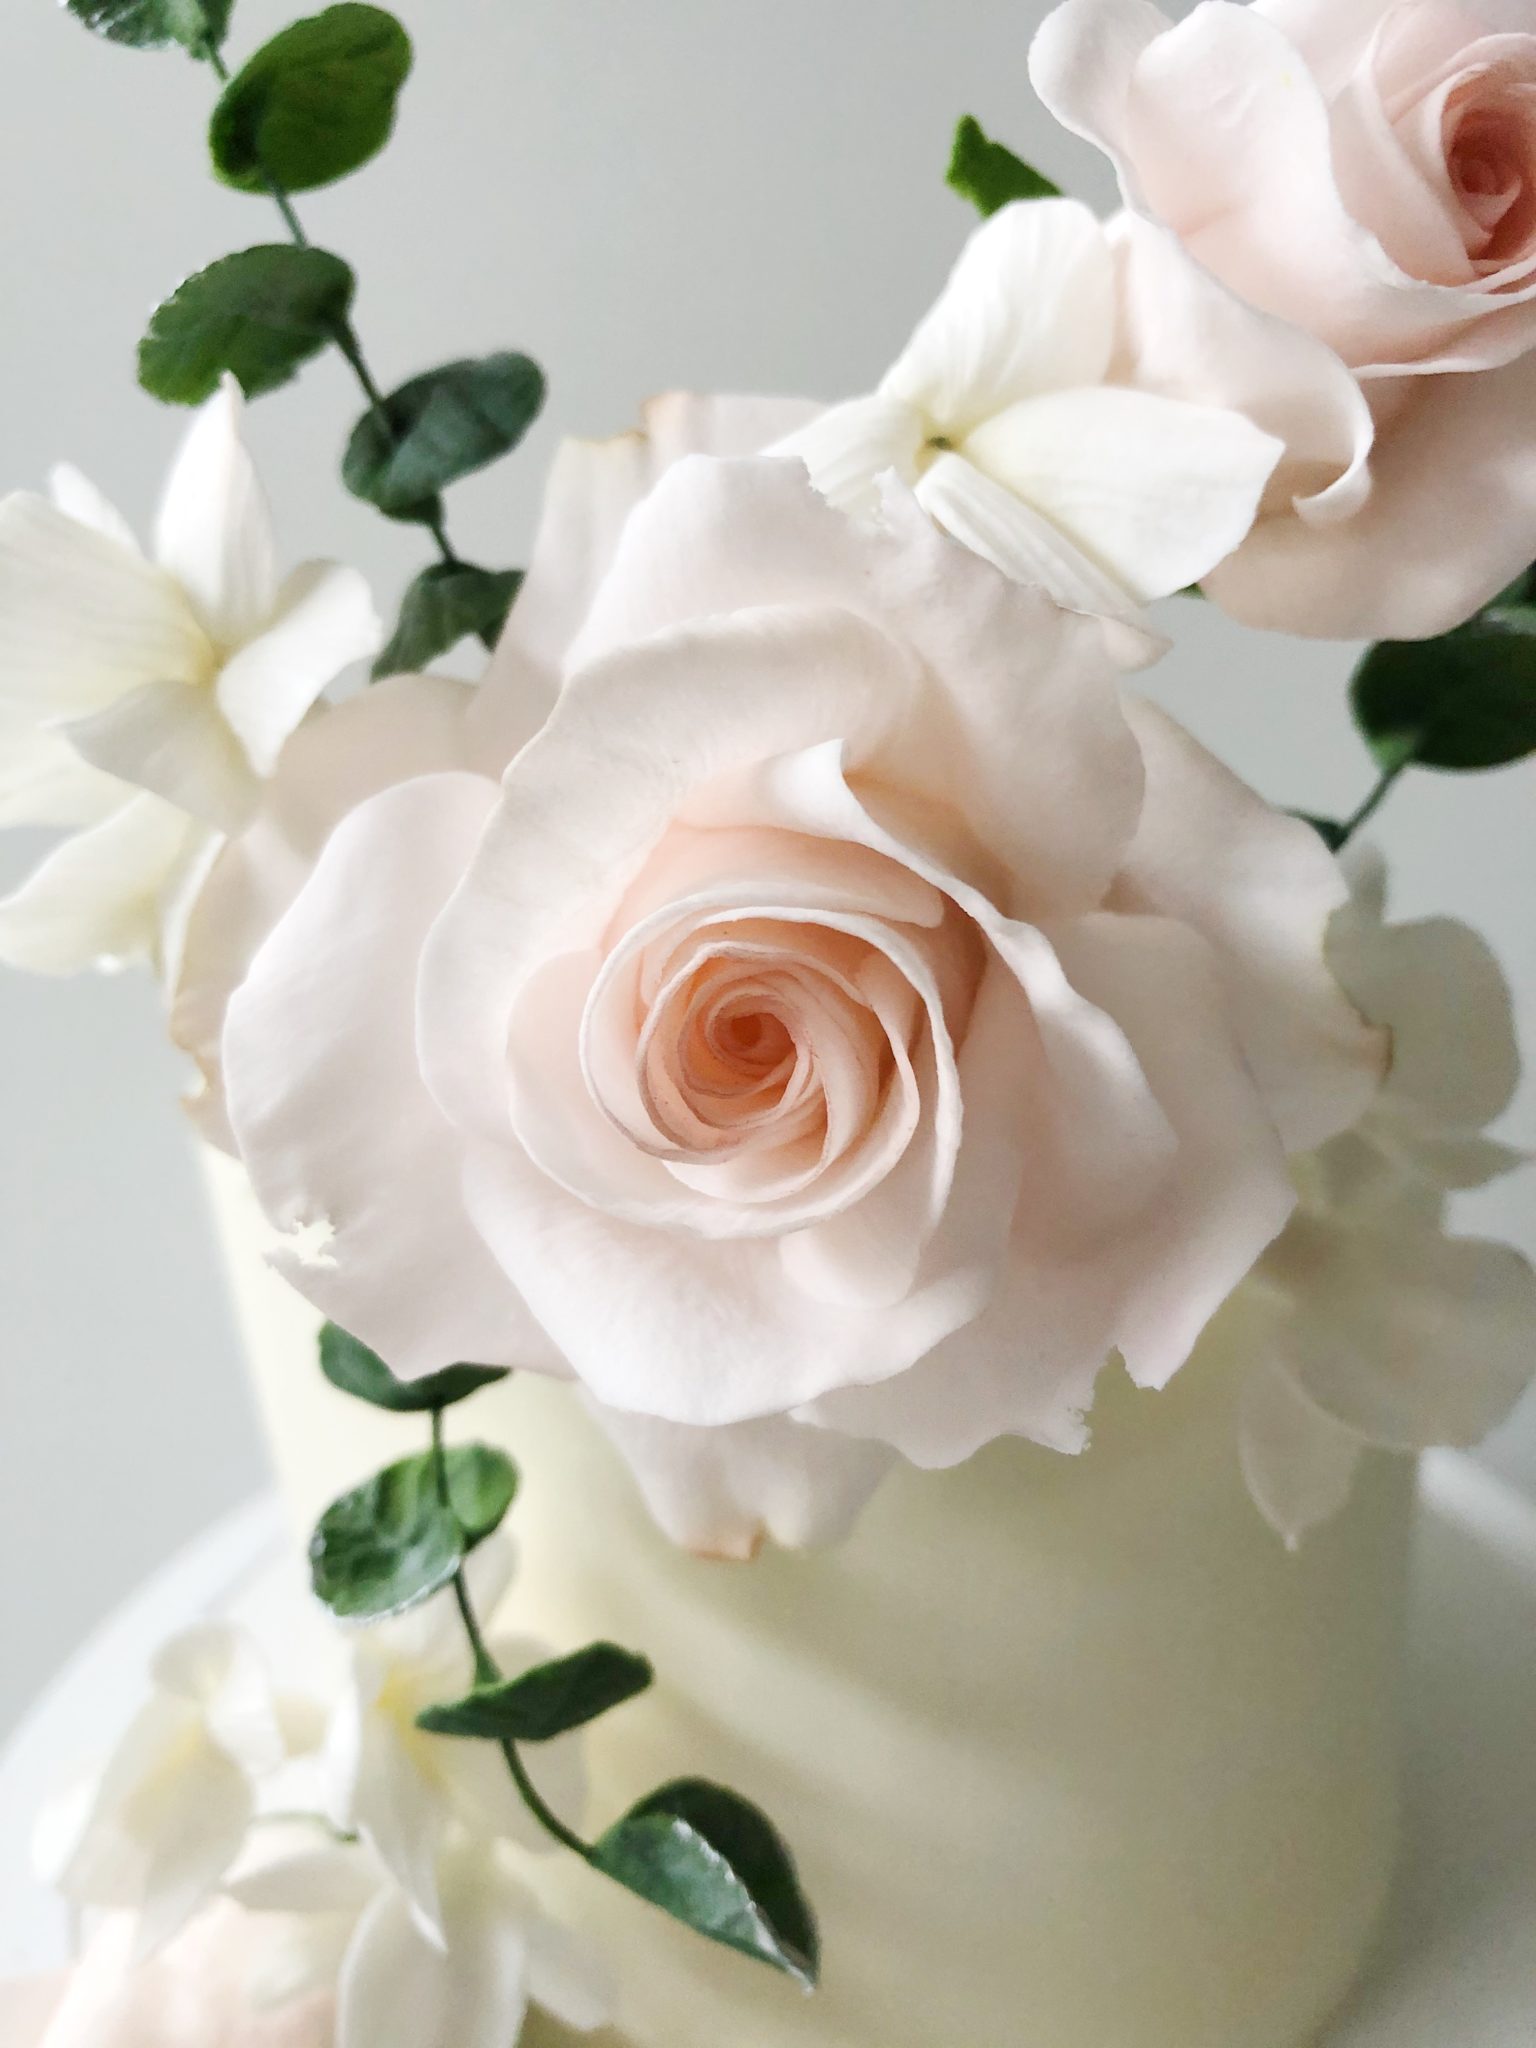 Blush sugar roses on an impossibly cute cake